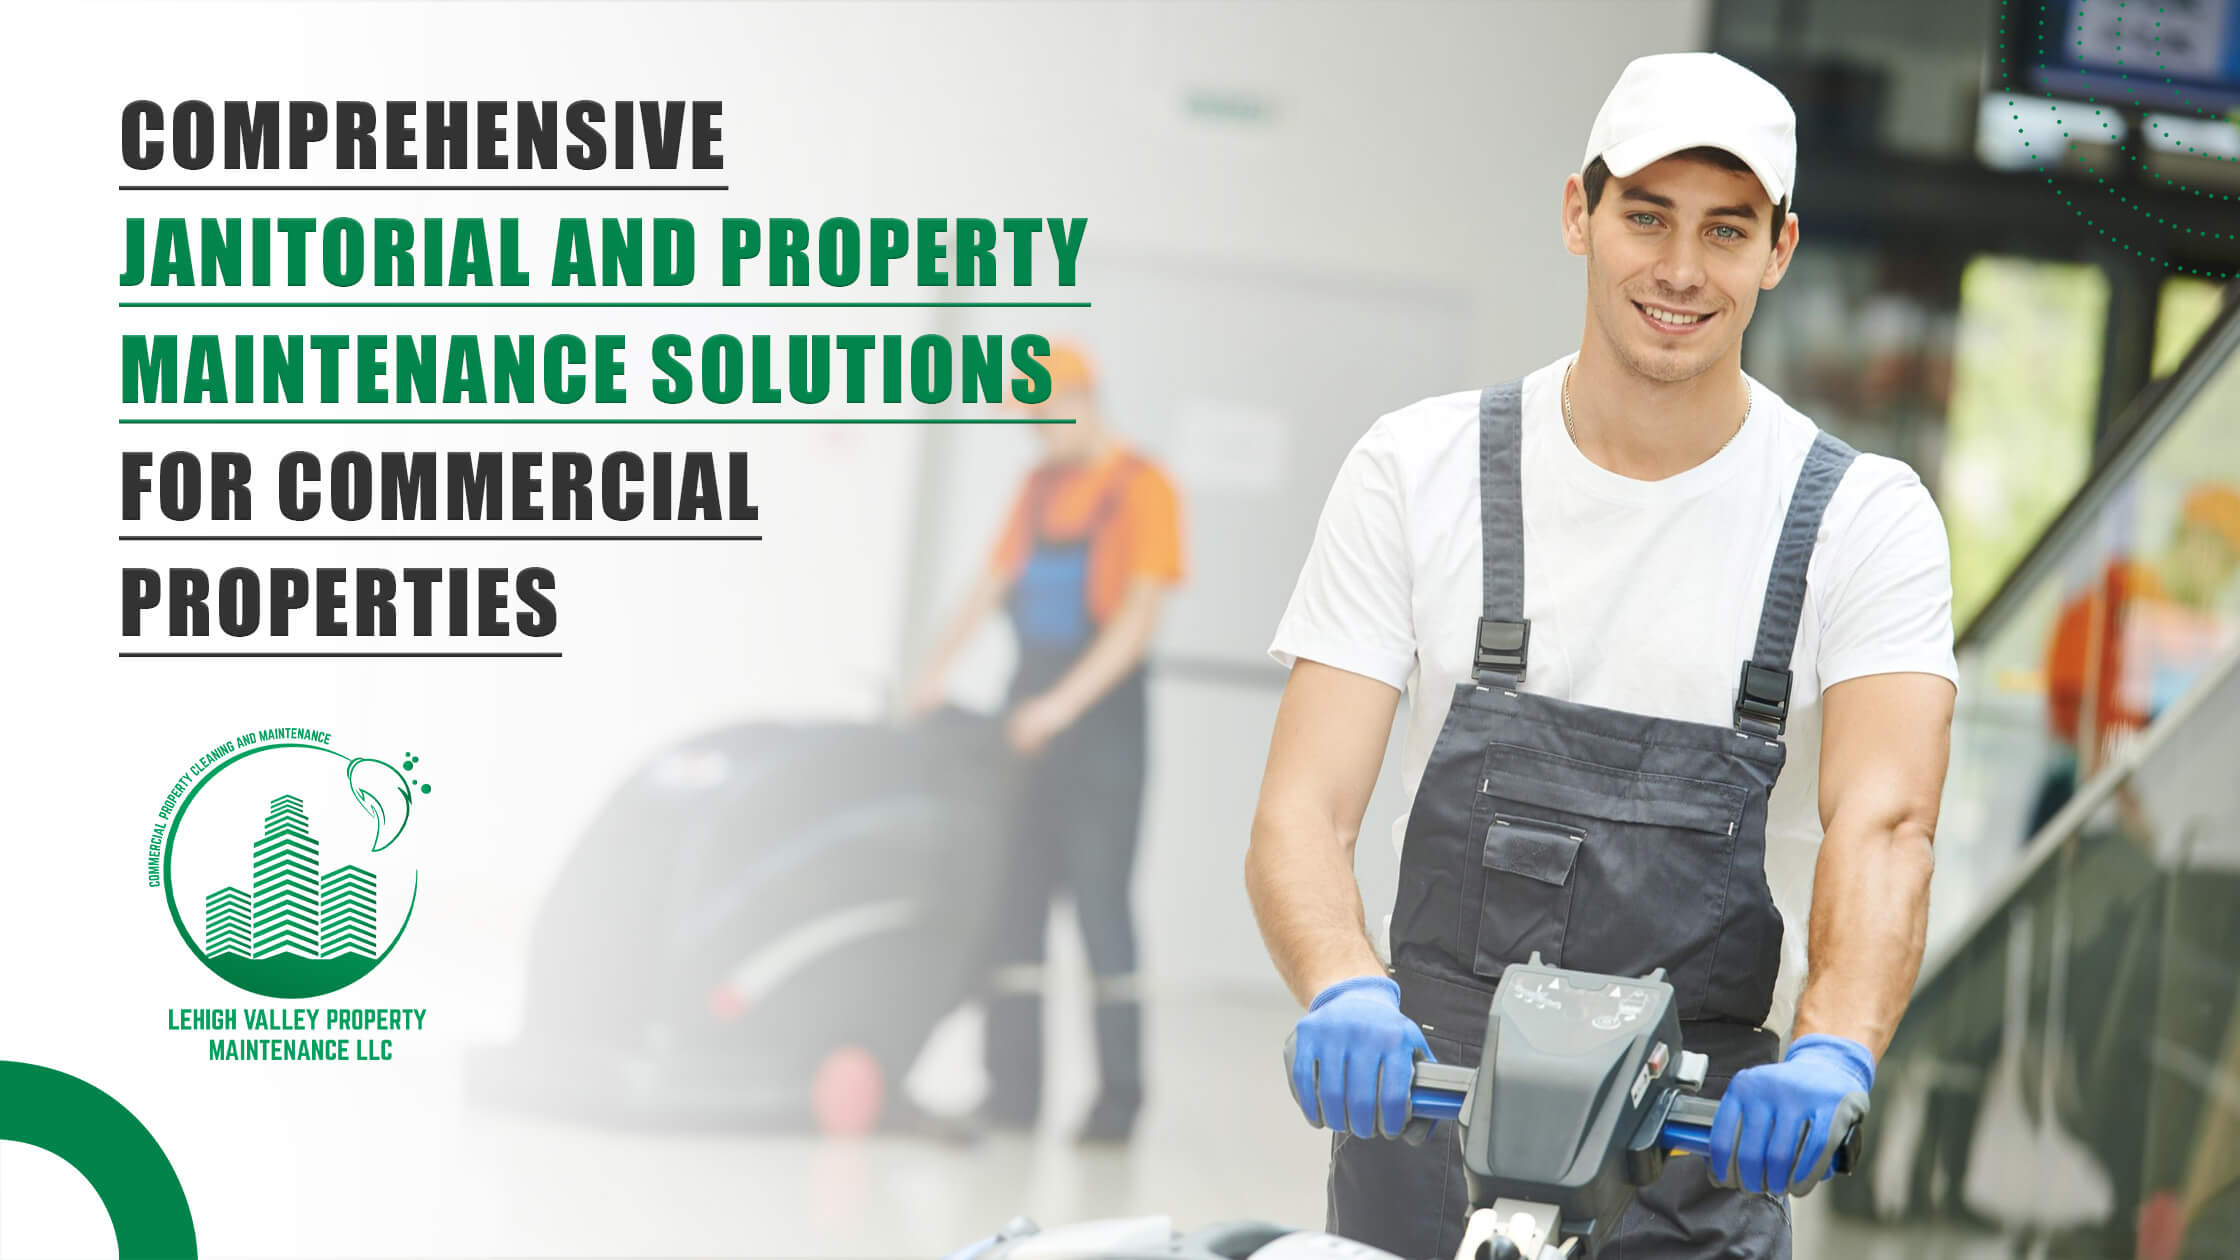 You are currently viewing Comprehensive Janitorial and Property Maintenance Solutions for Commercial Properties